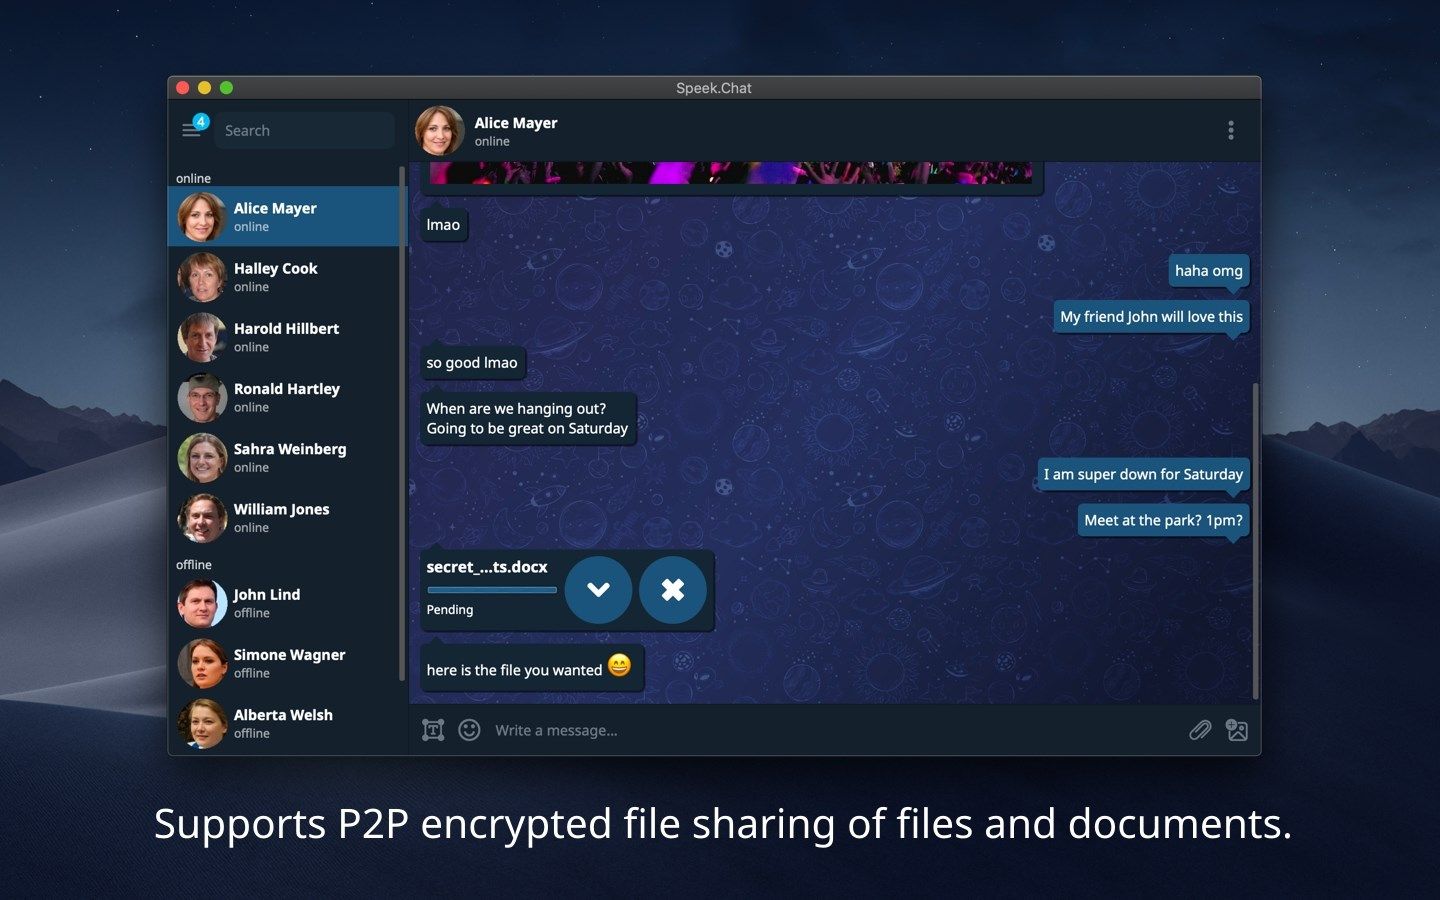 Supports P2P encrypted file sharing